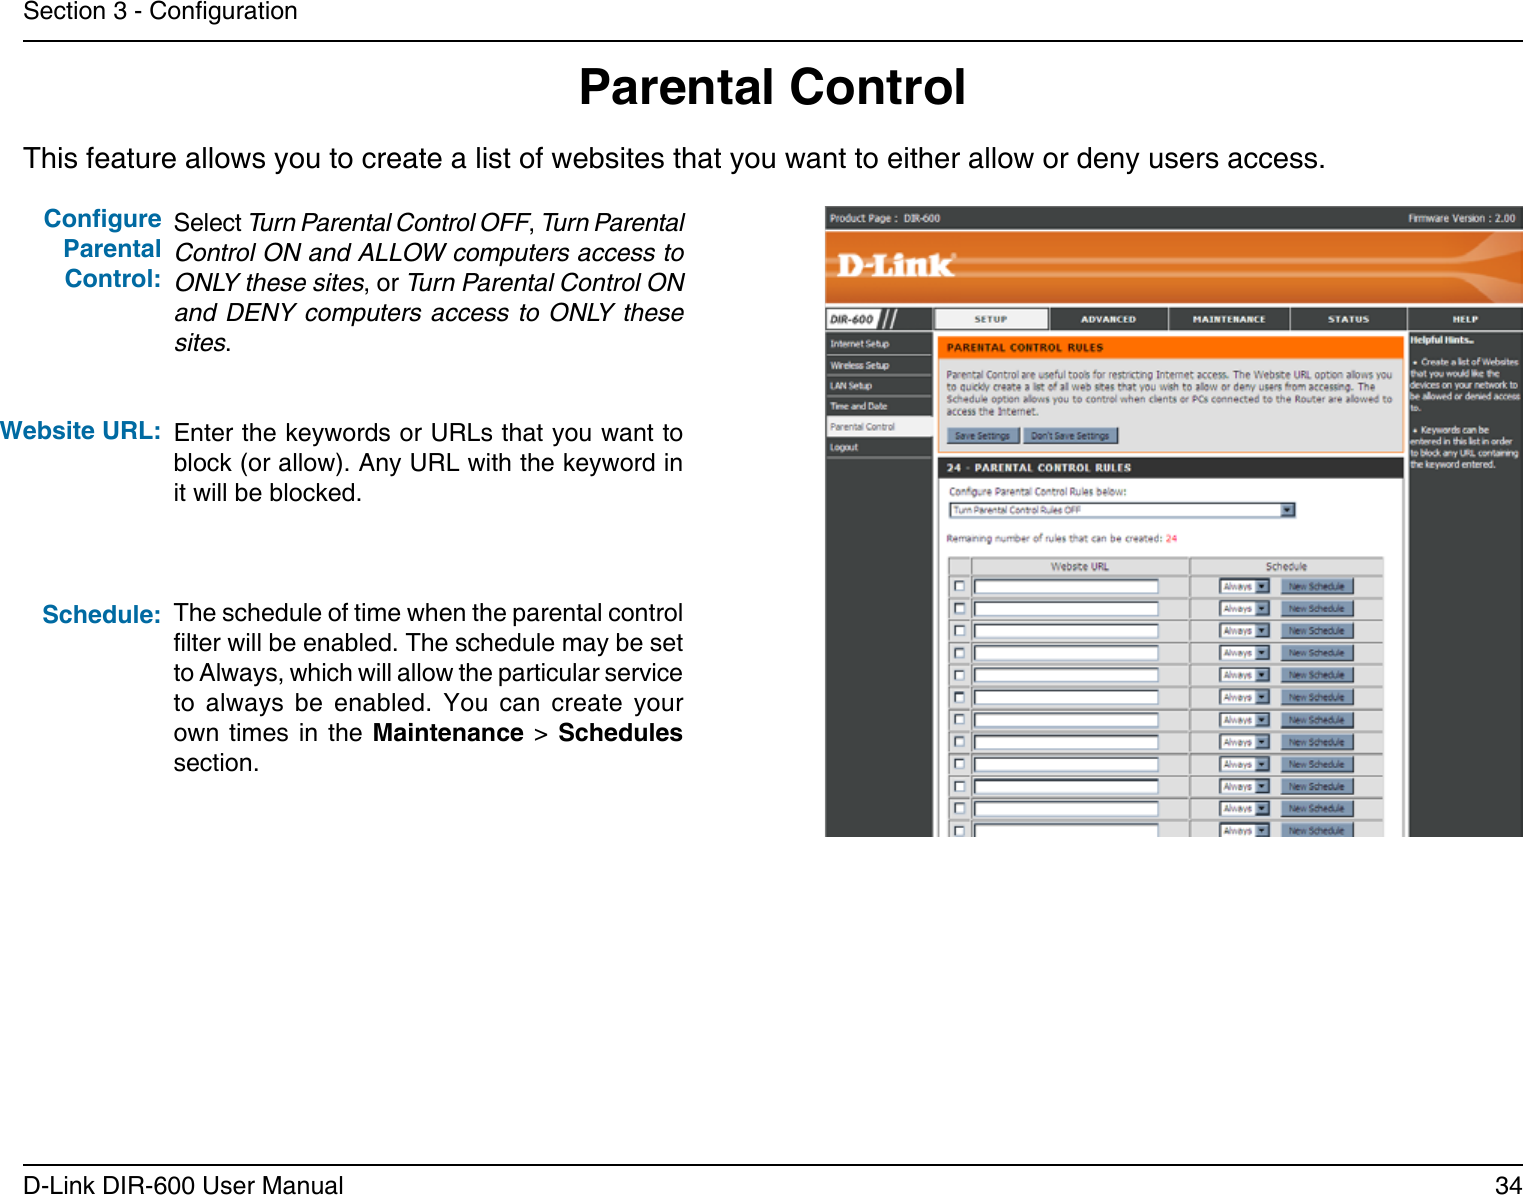 34D-Link DIR-600 User ManualSection 3 - CongurationThis feature allows you to create a list of websites that you want to either allow or deny users access.Parental ControlSelect Turn Parental Control OFF, Turn Parental Control ON and ALLOW computers access to ONLY these sites, or Turn Parental Control ON and DENY computers access to ONLY these sites.Enter the keywords or URLs that you want to block (or allow). Any URL with the keyword in it will be blocked.The schedule of time when the parental control lter will be enabled. The schedule may be set to Always, which will allow the particular service to  always  be  enabled.  You  can  create  your own times  in  the Maintenance &gt; Schedules section.Congure Parental Control:Website URL:Schedule: